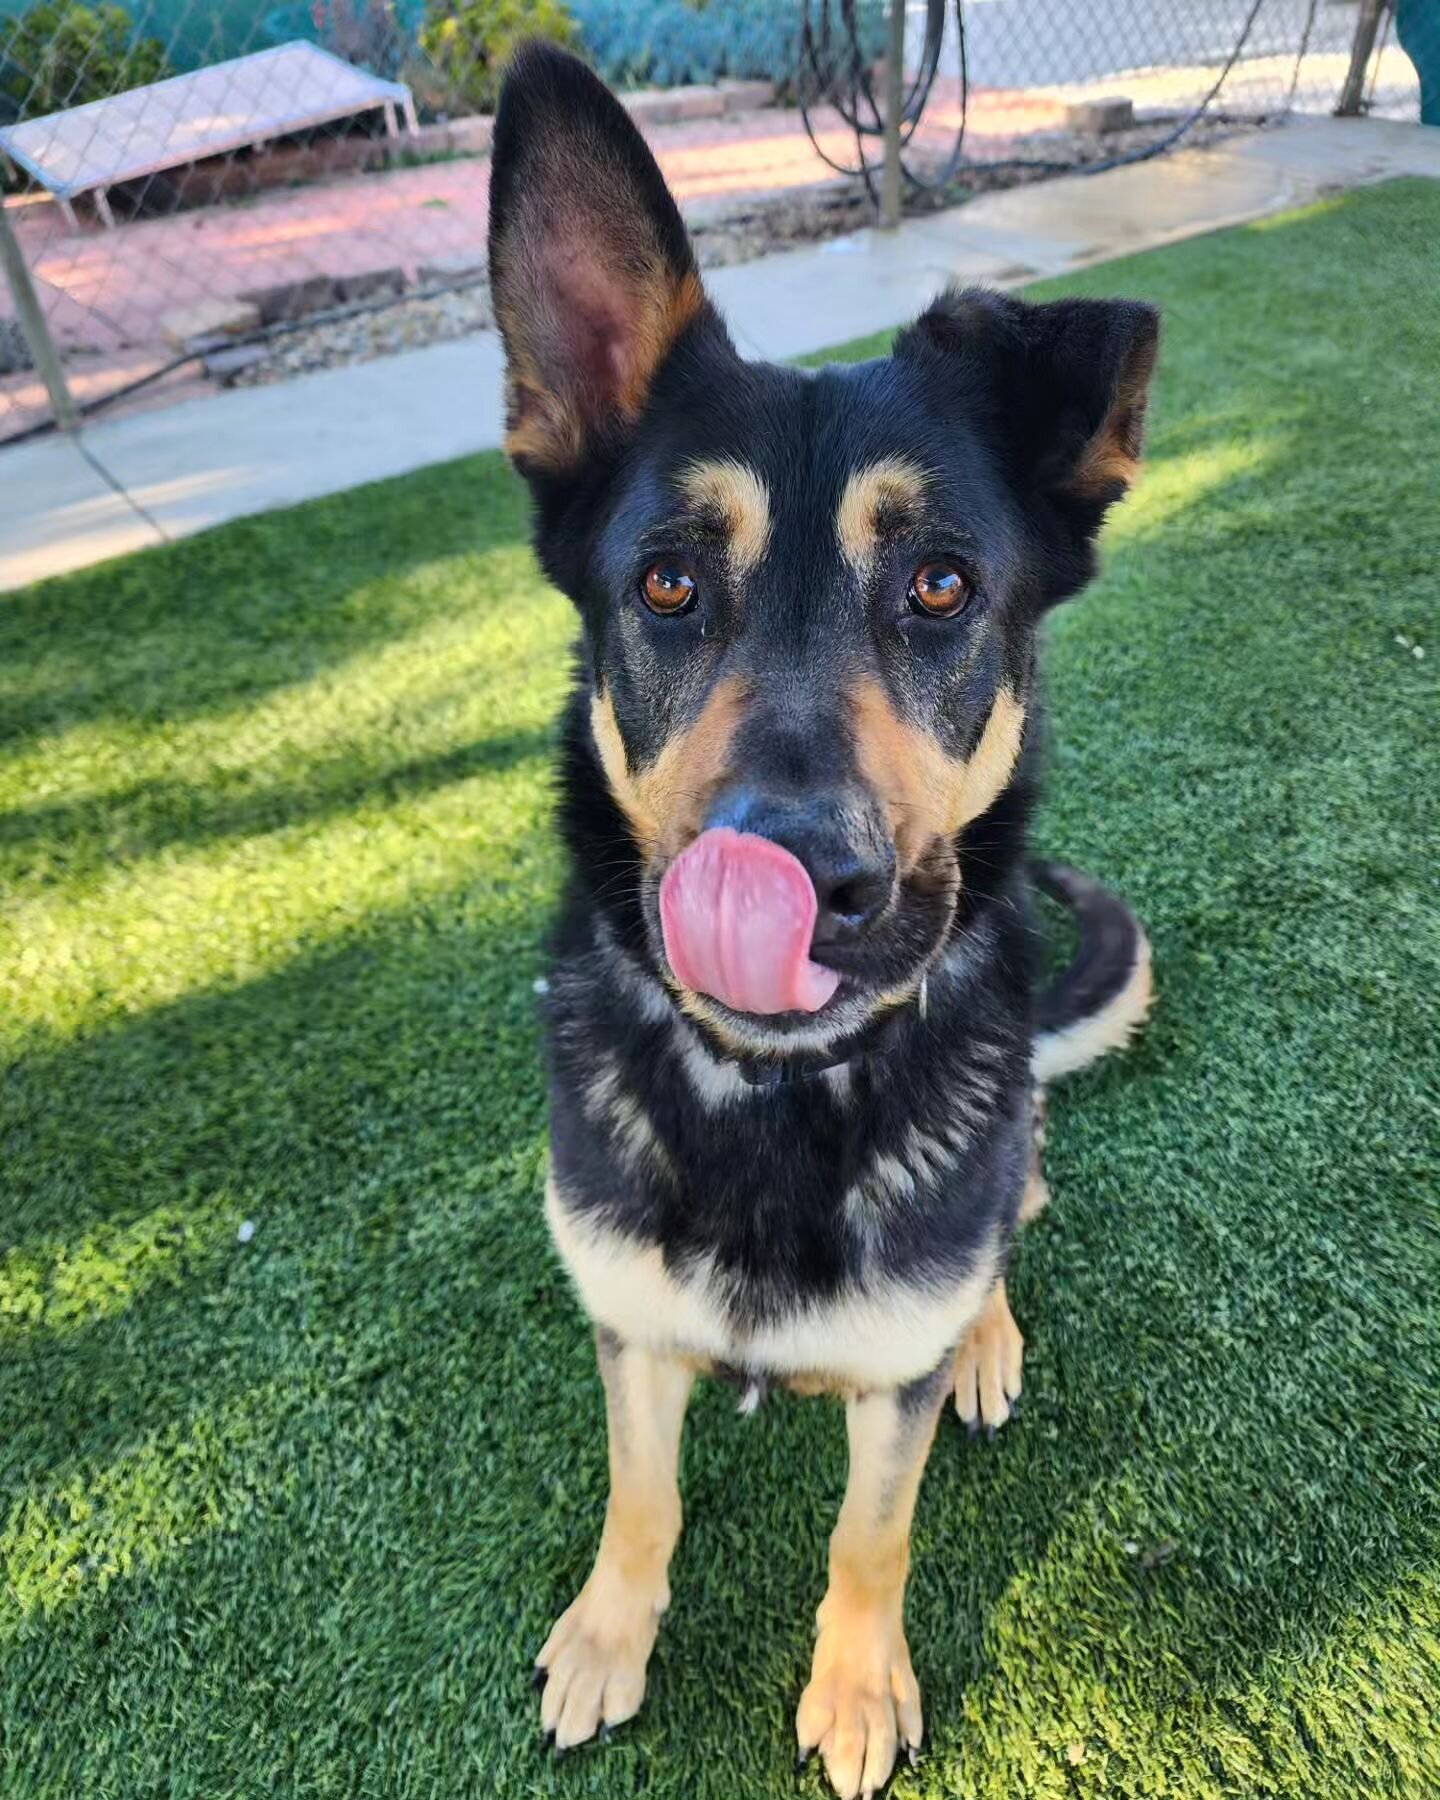 Say hi to 6 year old Max, #A55229641! Max is a 2nd chance transfer pup from the Castaic Animal Care Center &amp; he is ready to find a forever home! 

Upon arrival at @agouraanimalslaco, Max was observed to not be weight bearing on his right hind leg